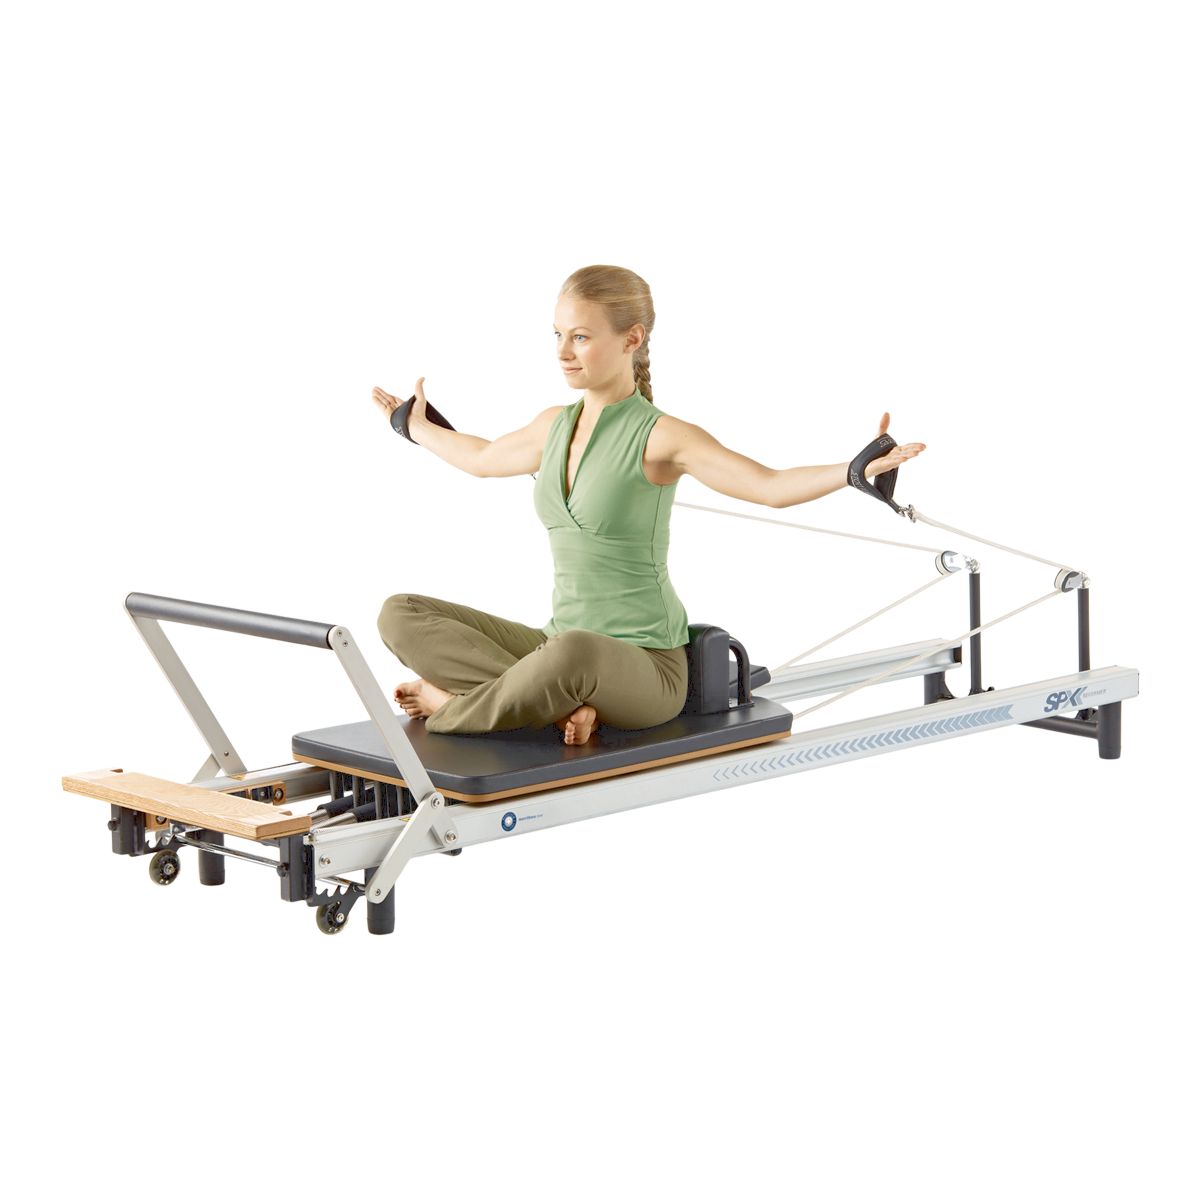  STOTT PILATES Stability Barre Training with Reformer and  Cardio-Tramp Rebounder DVD : Stott Pilates: Sports & Outdoors